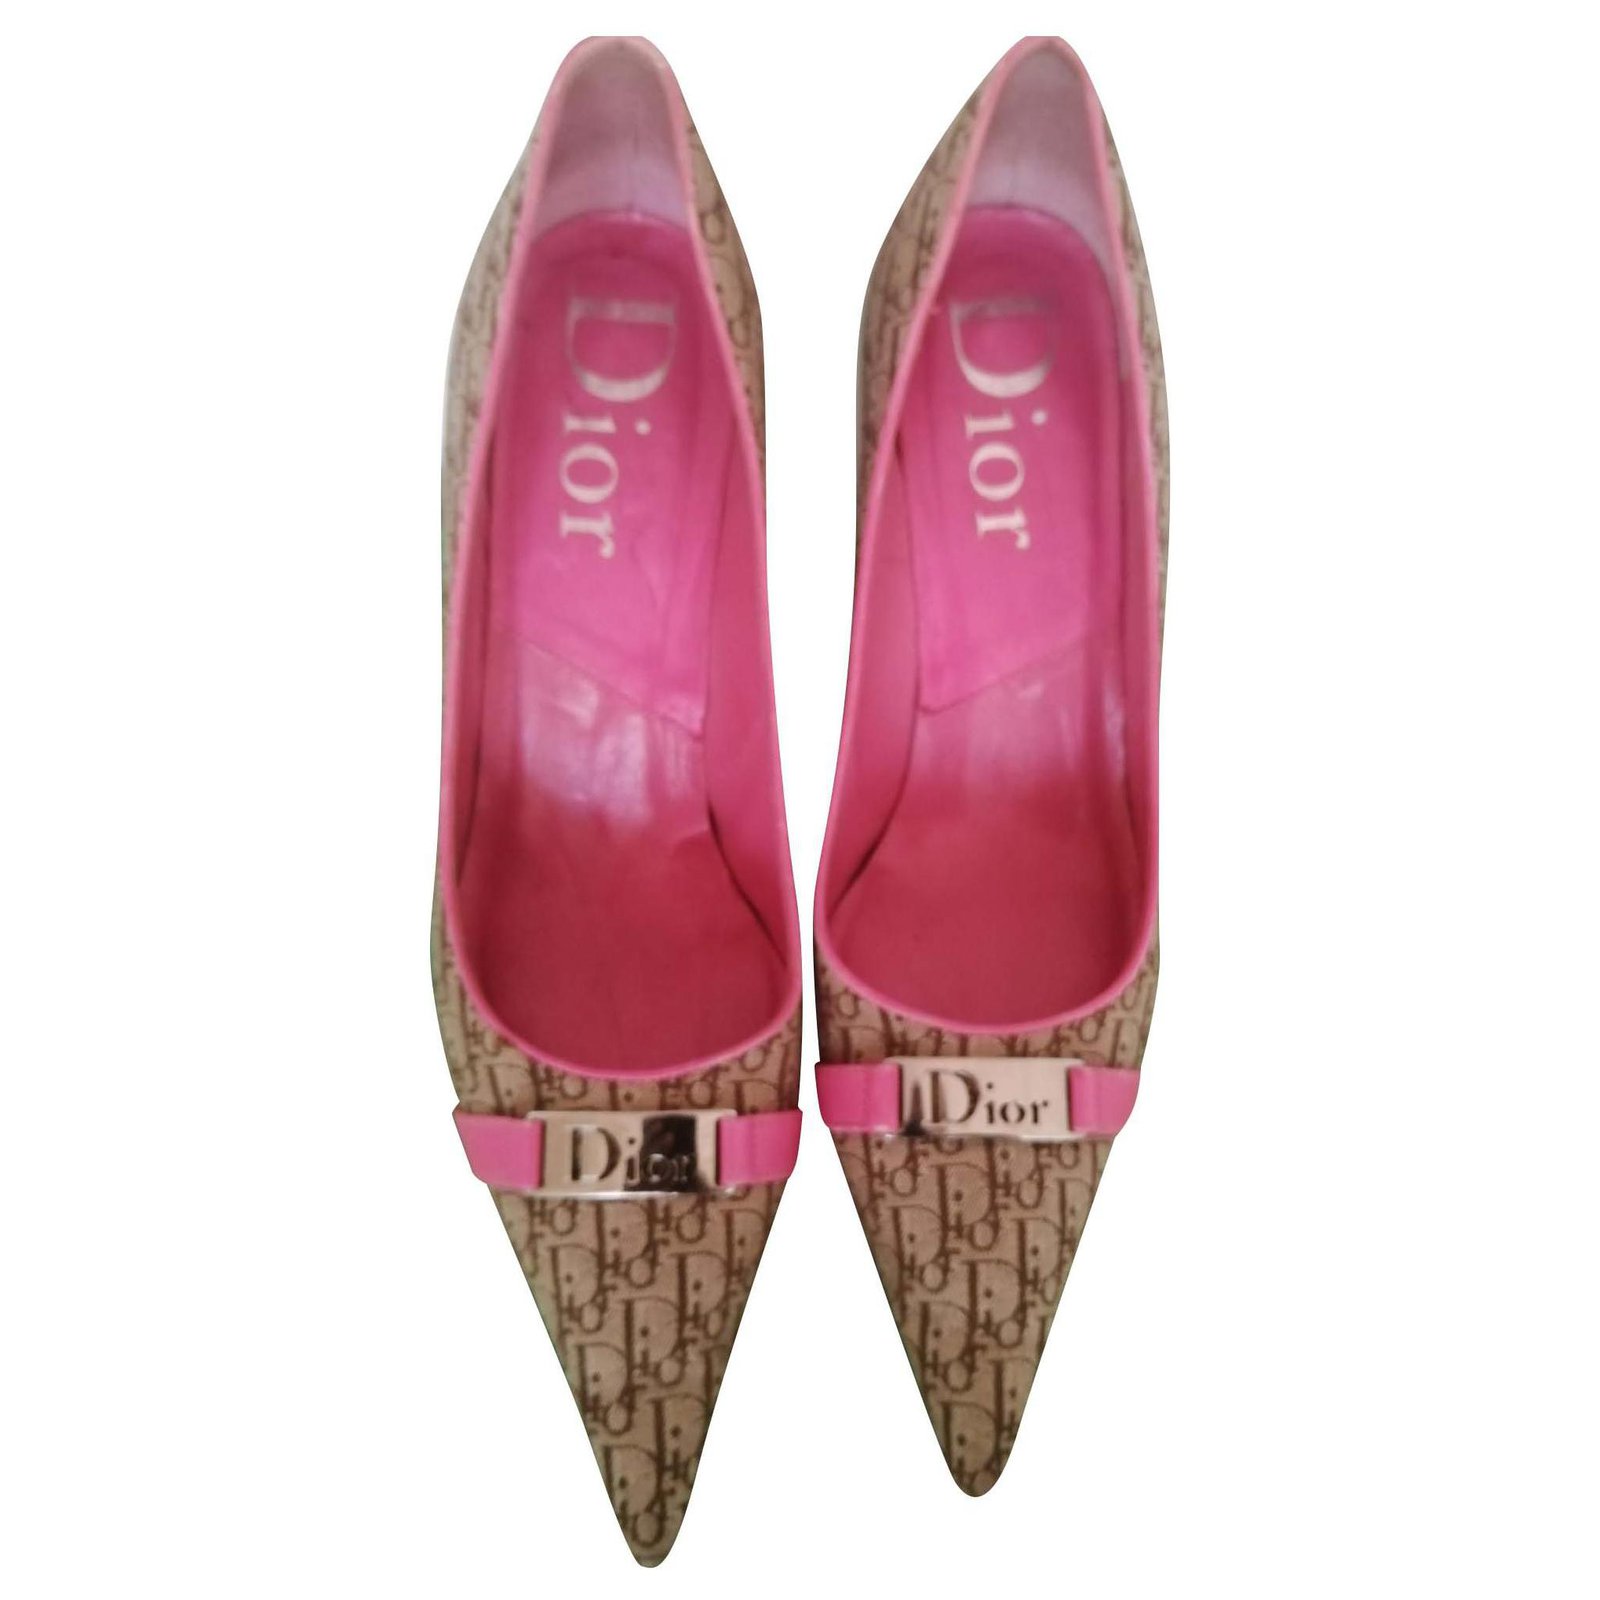 dior pointed toe pumps